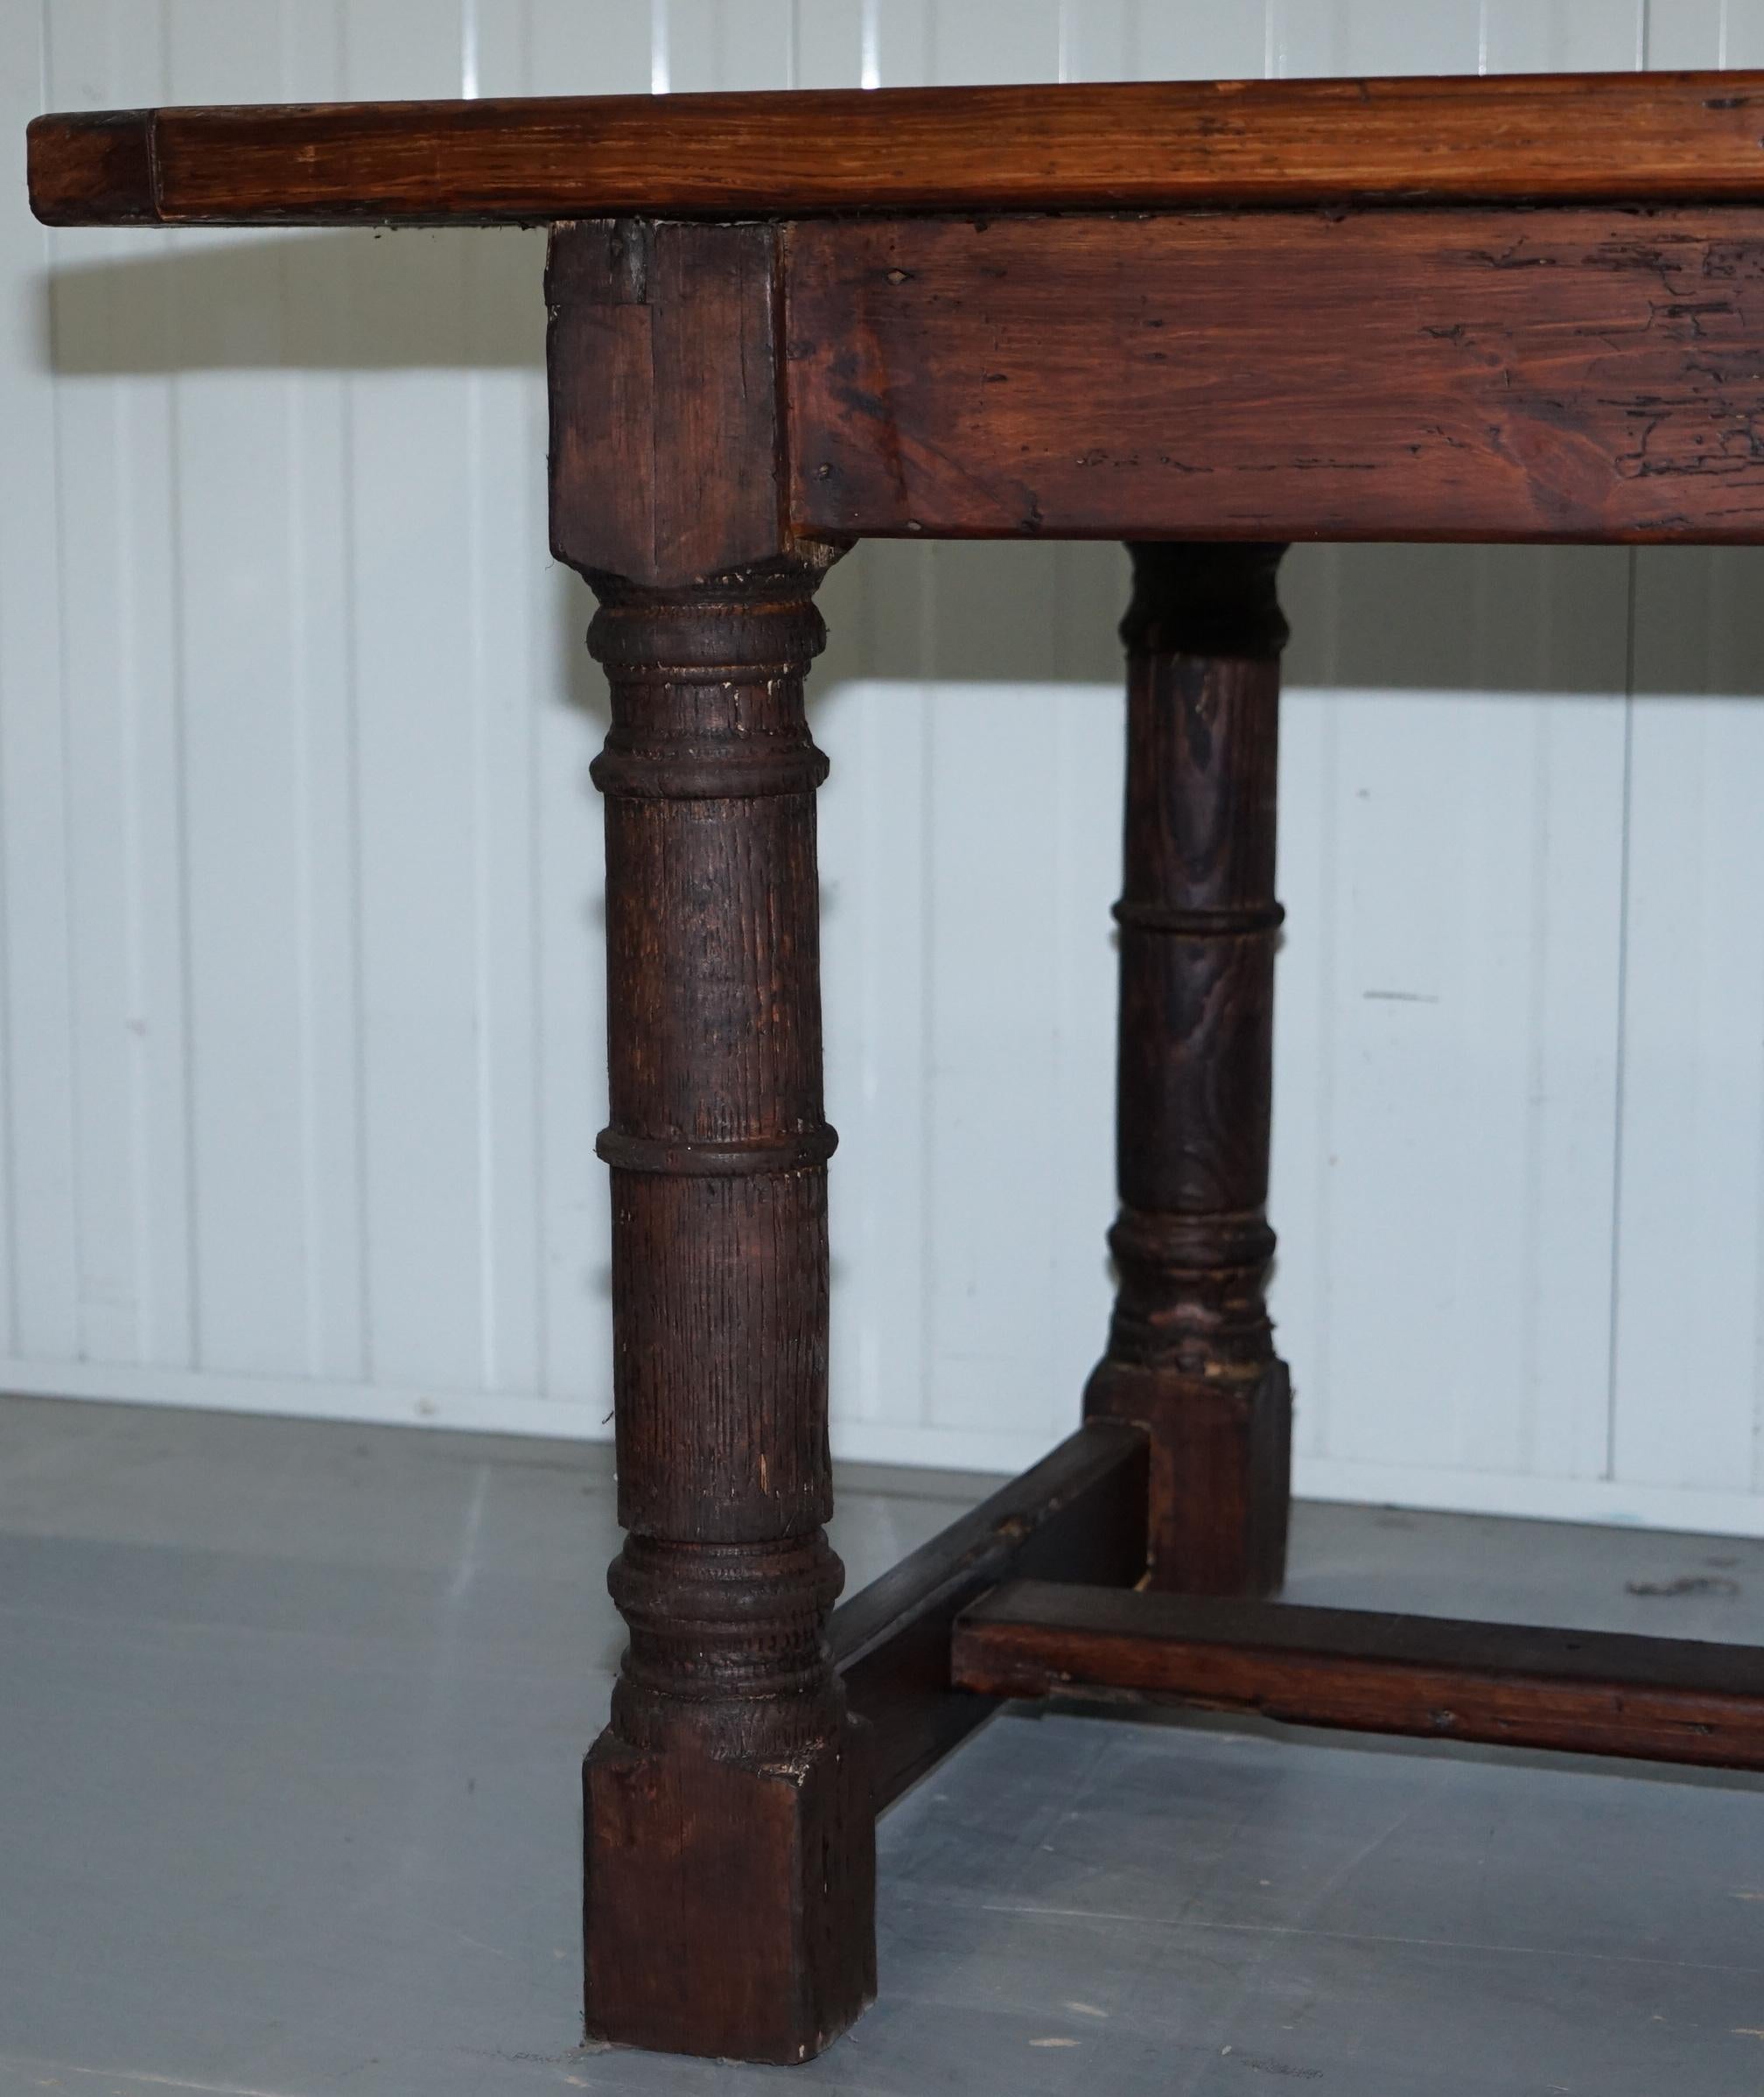 Vintage Timber Planked Top English Farmhouse Refectory Dining Table Seats 8-10 4